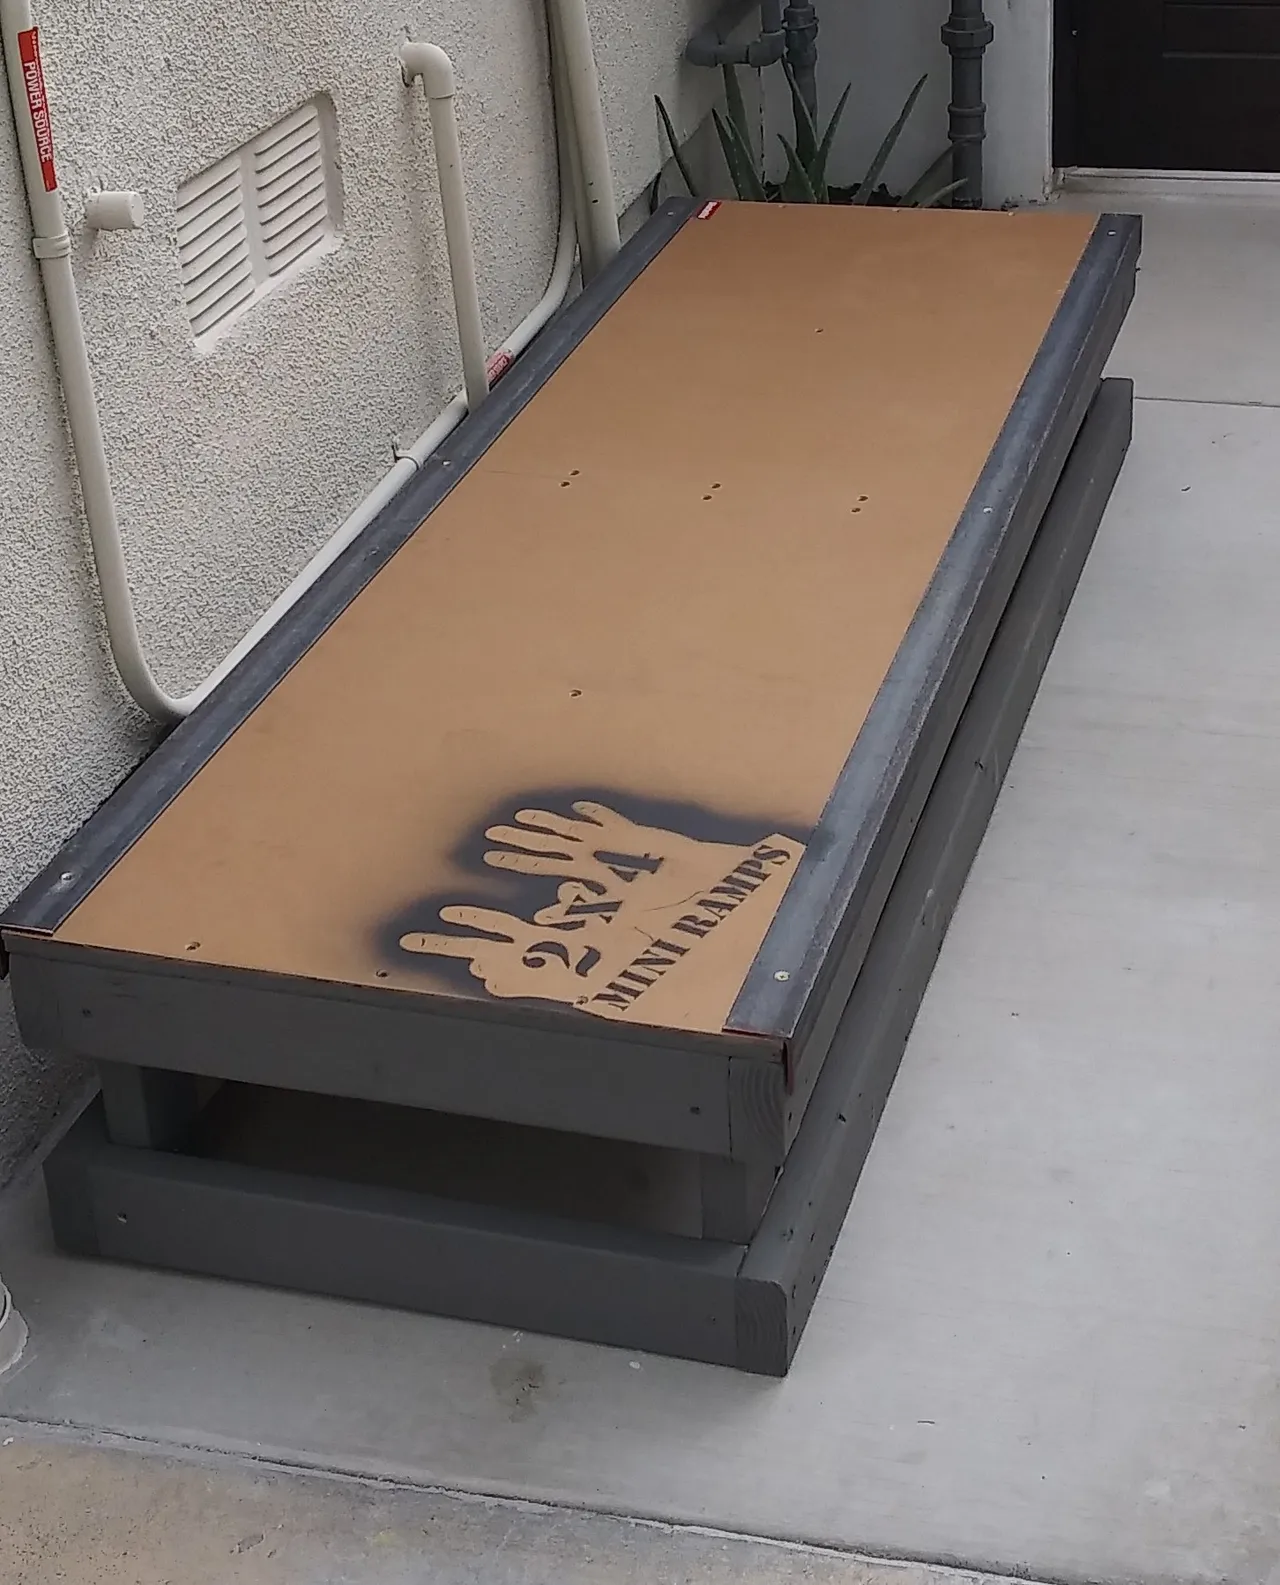 One foot high by six foot long grind box on concrete, front view